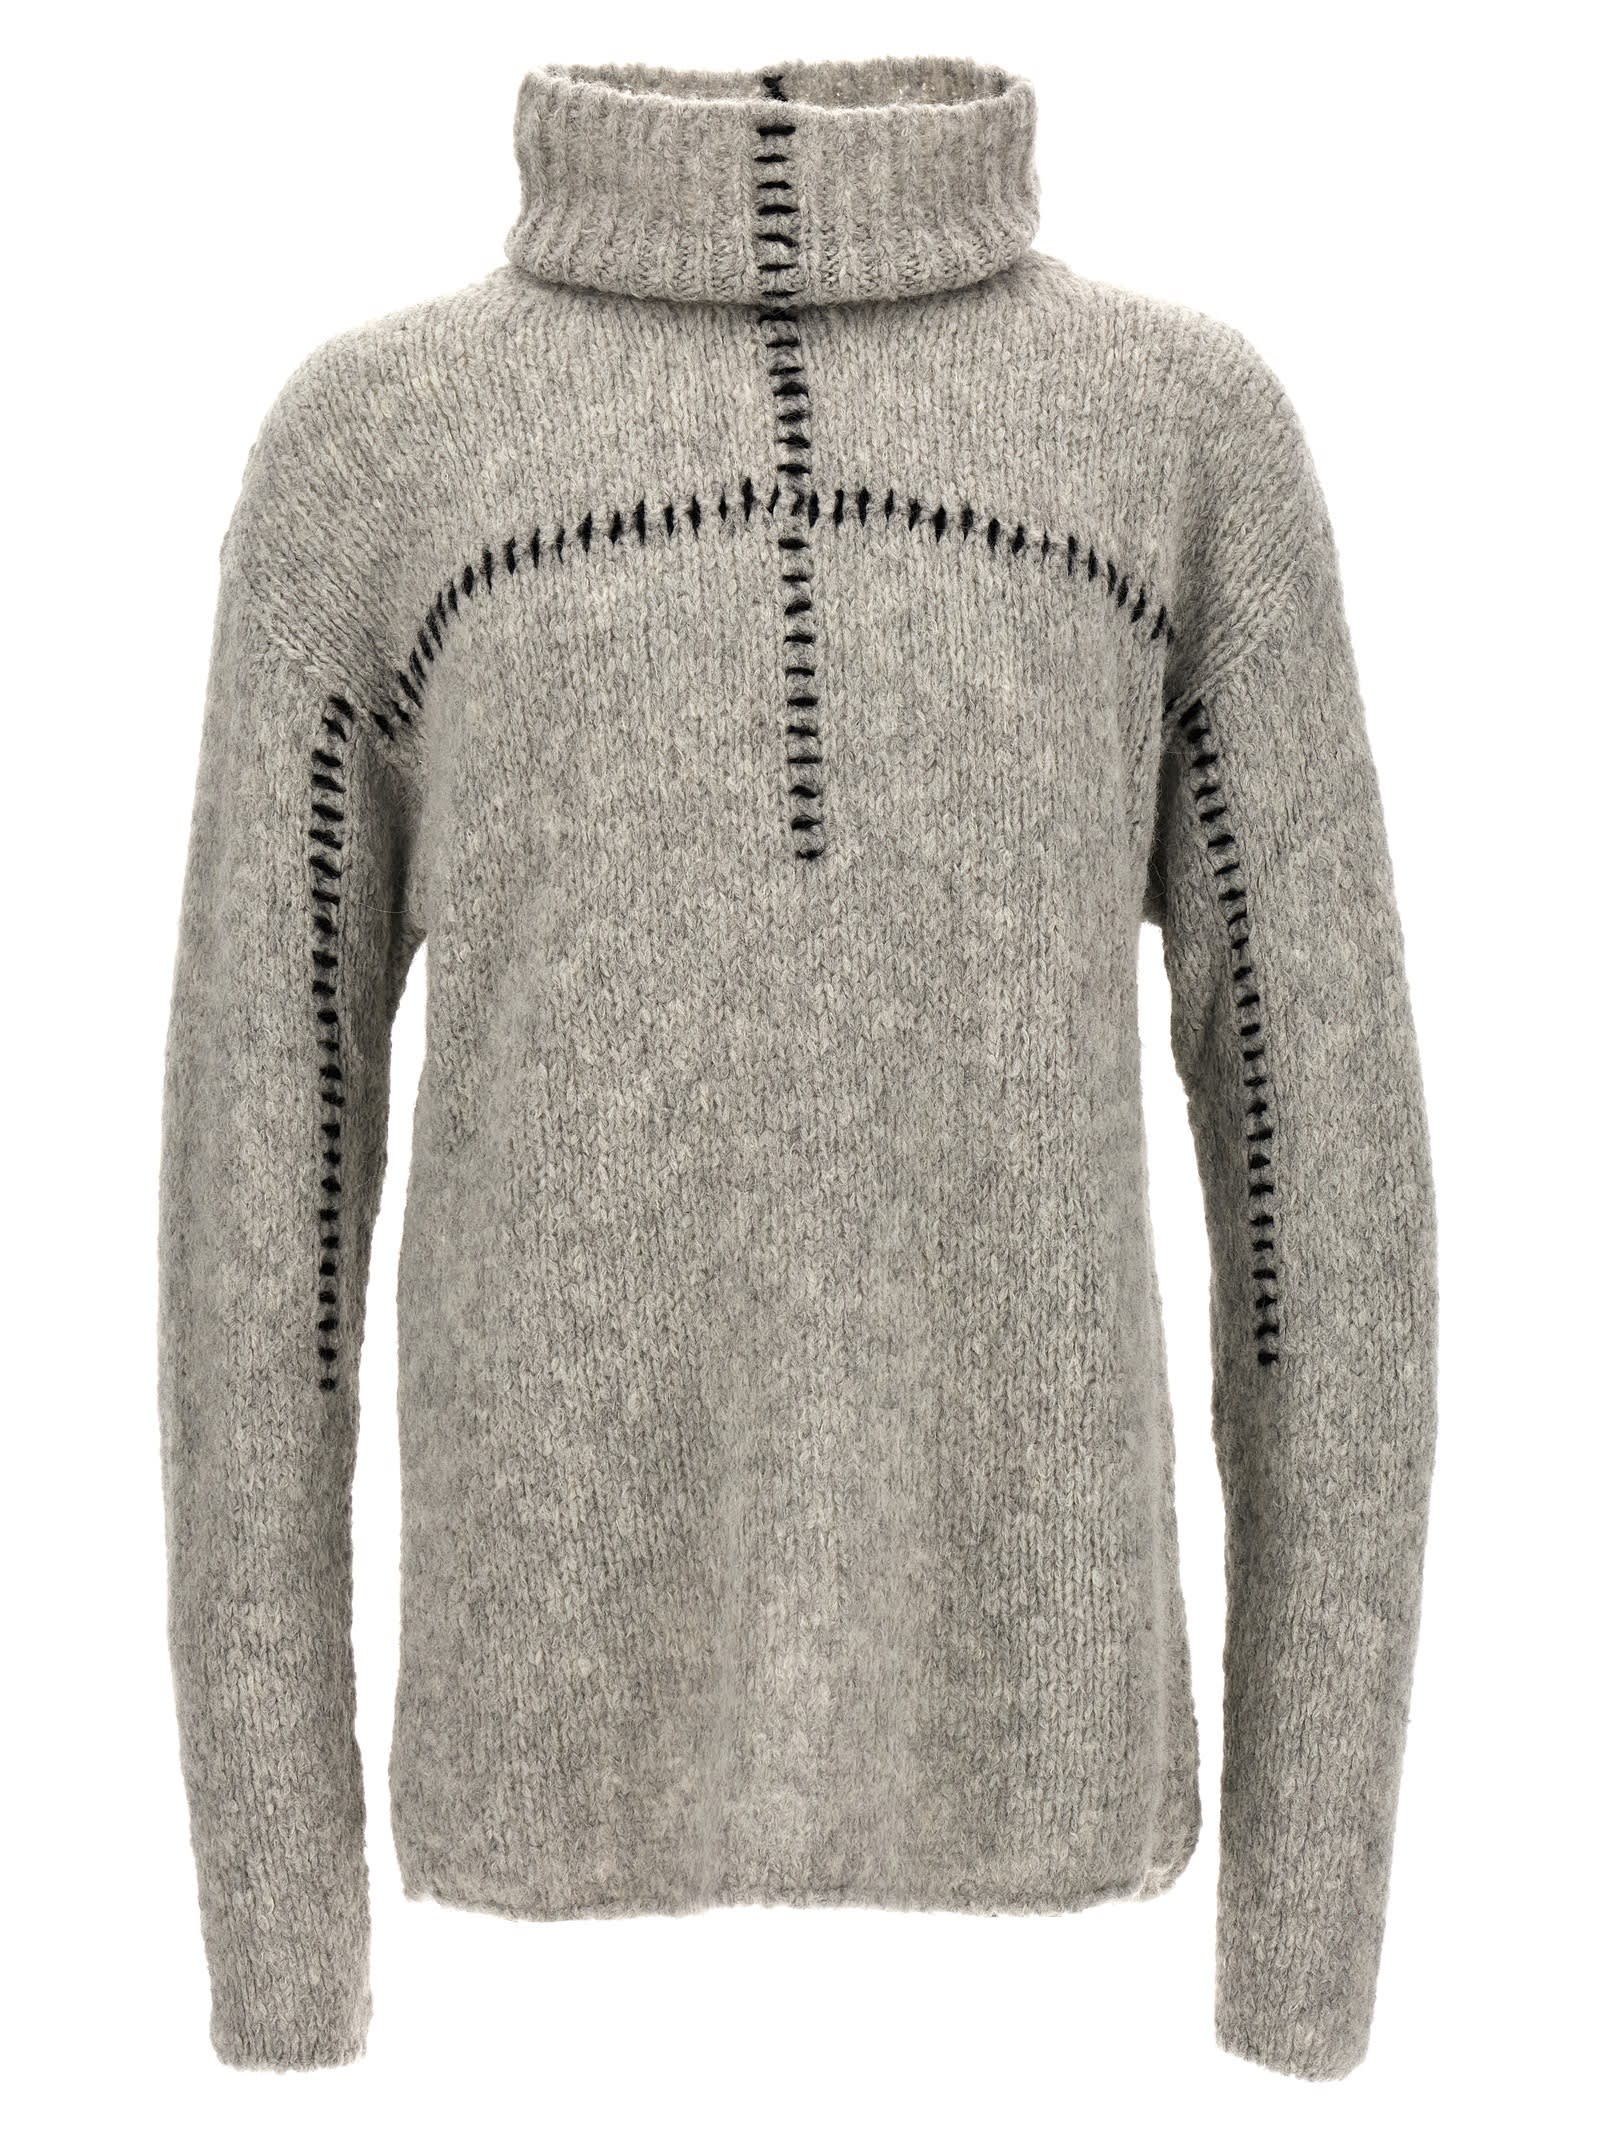 THOM KROM CONTRAST EMBROIDERY SWEATER